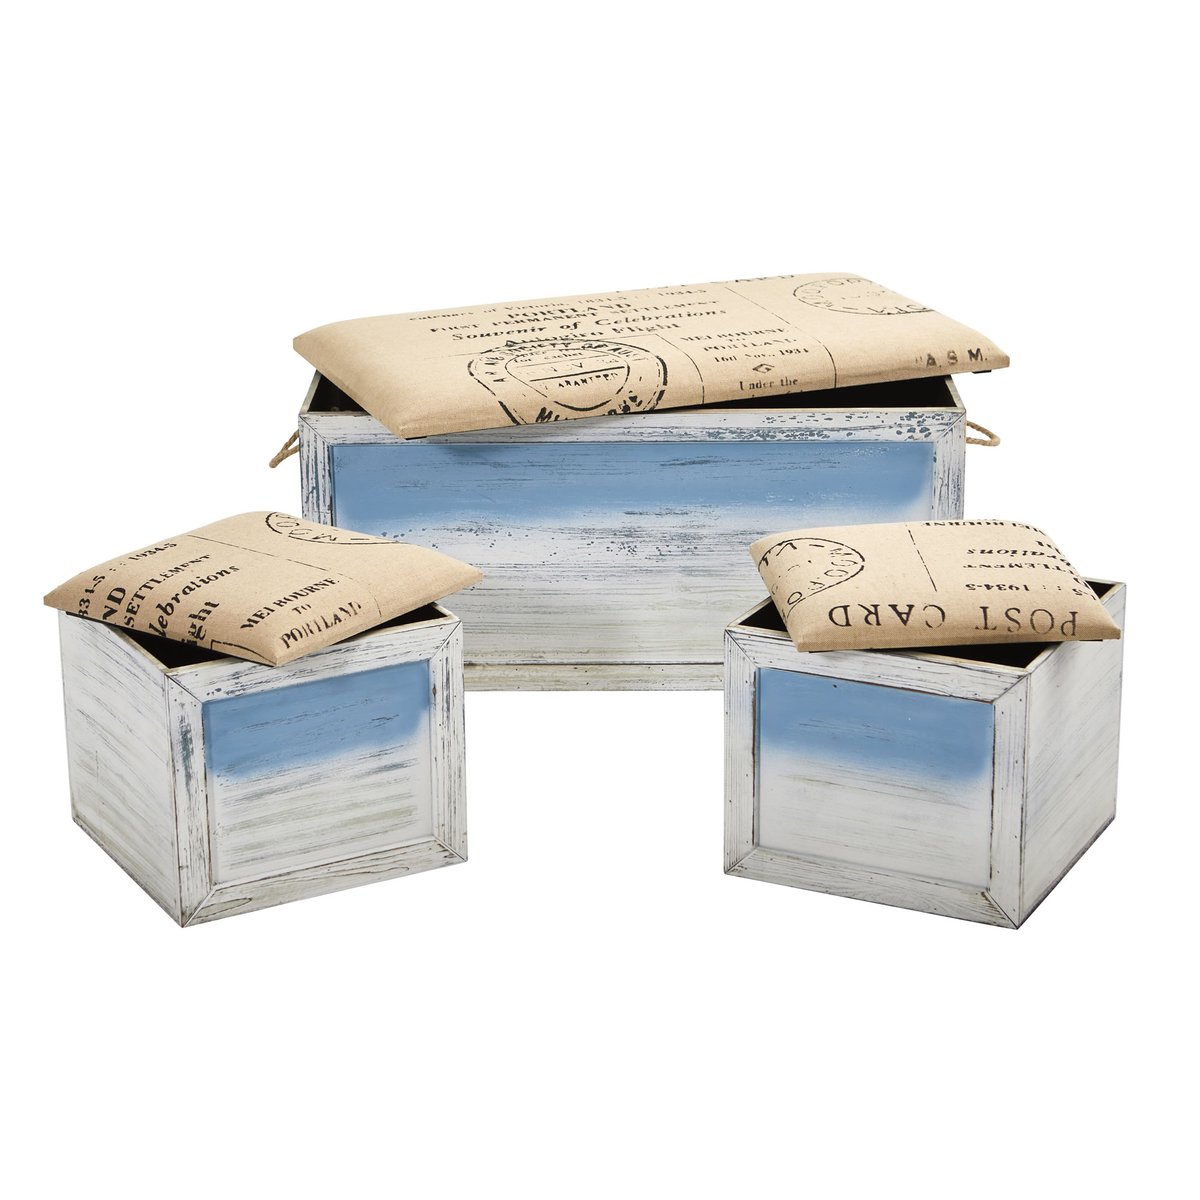 This set of three nautically-inspired storage boxes are as attractive as they are useful! Come and check this out! casanovadesigns.com/products/view/… #homedecor #interiordesign #home #interior #design #homedesign #decoration #furniture #interiors #homedecoration #interiorstyling #living